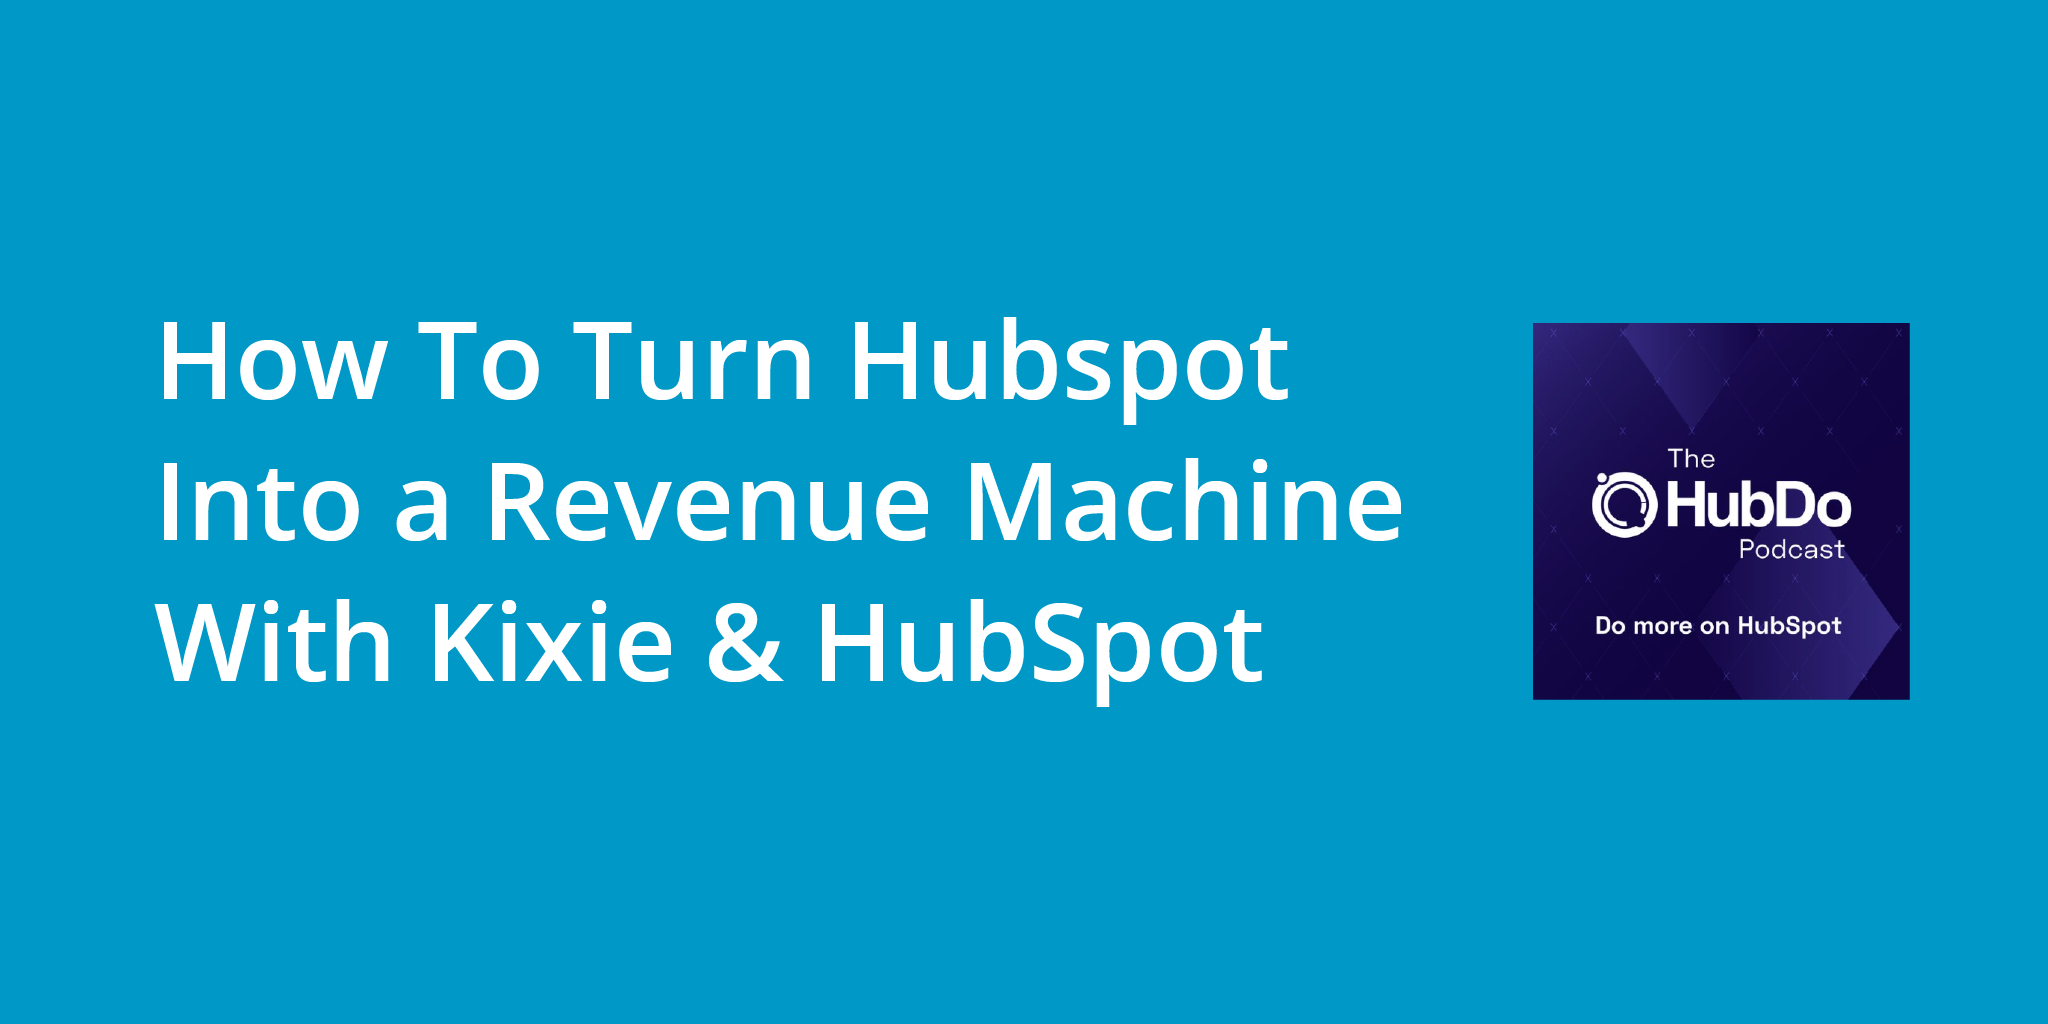 How To Turn Hubspot Into a Revenue Machine With Kixie & HubSpot | Telephones for business